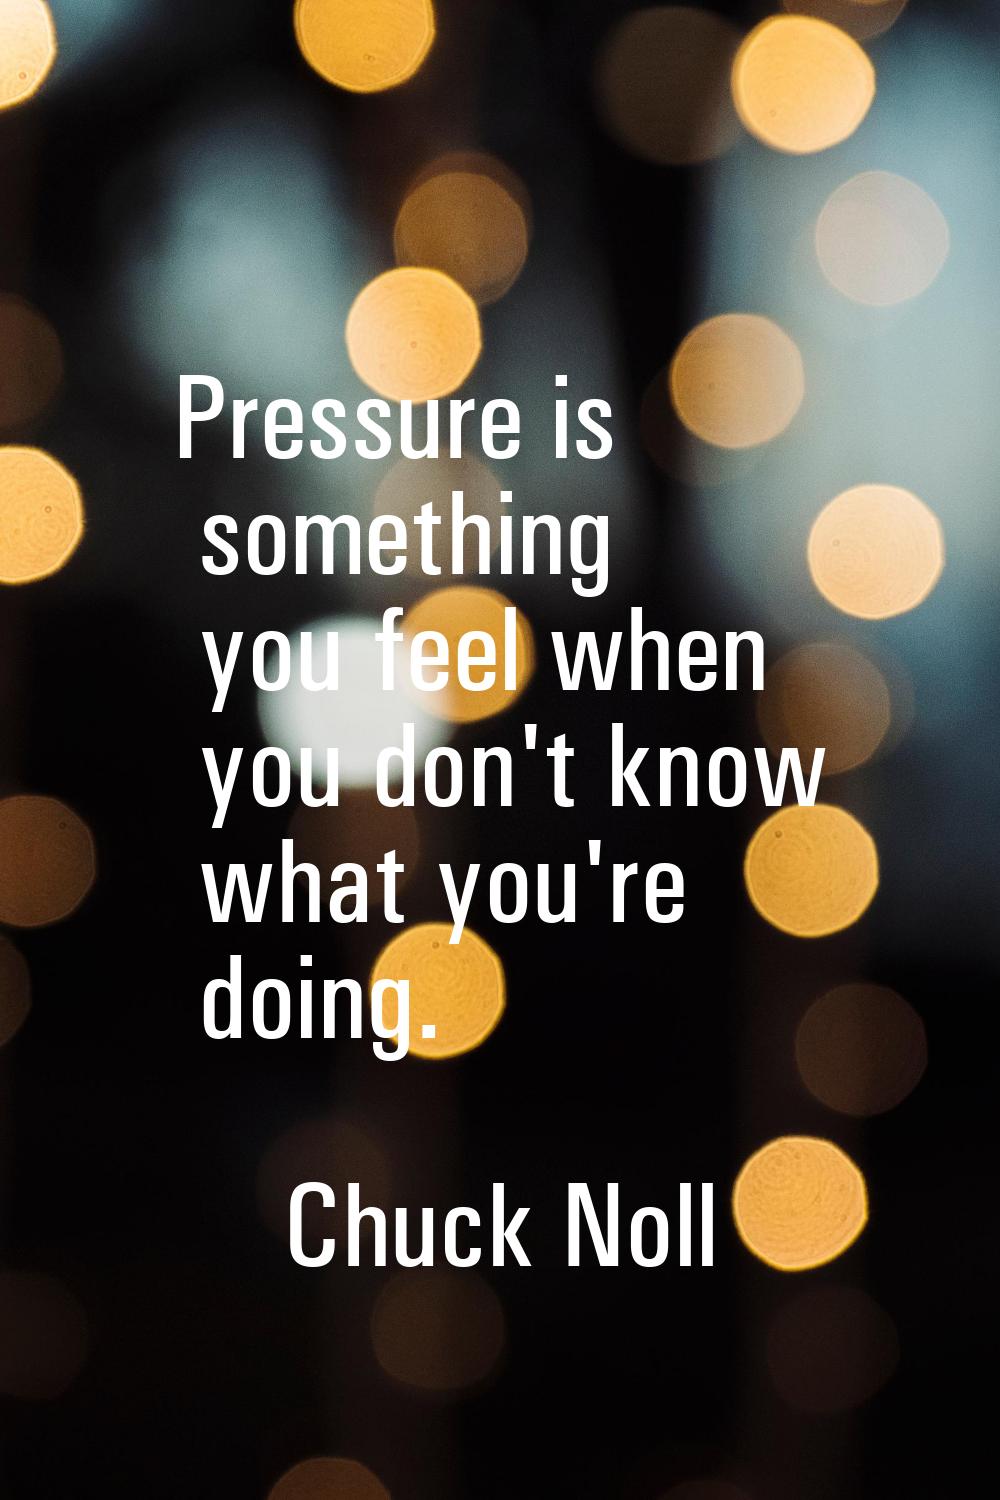 Pressure is something you feel when you don't know what you're doing.